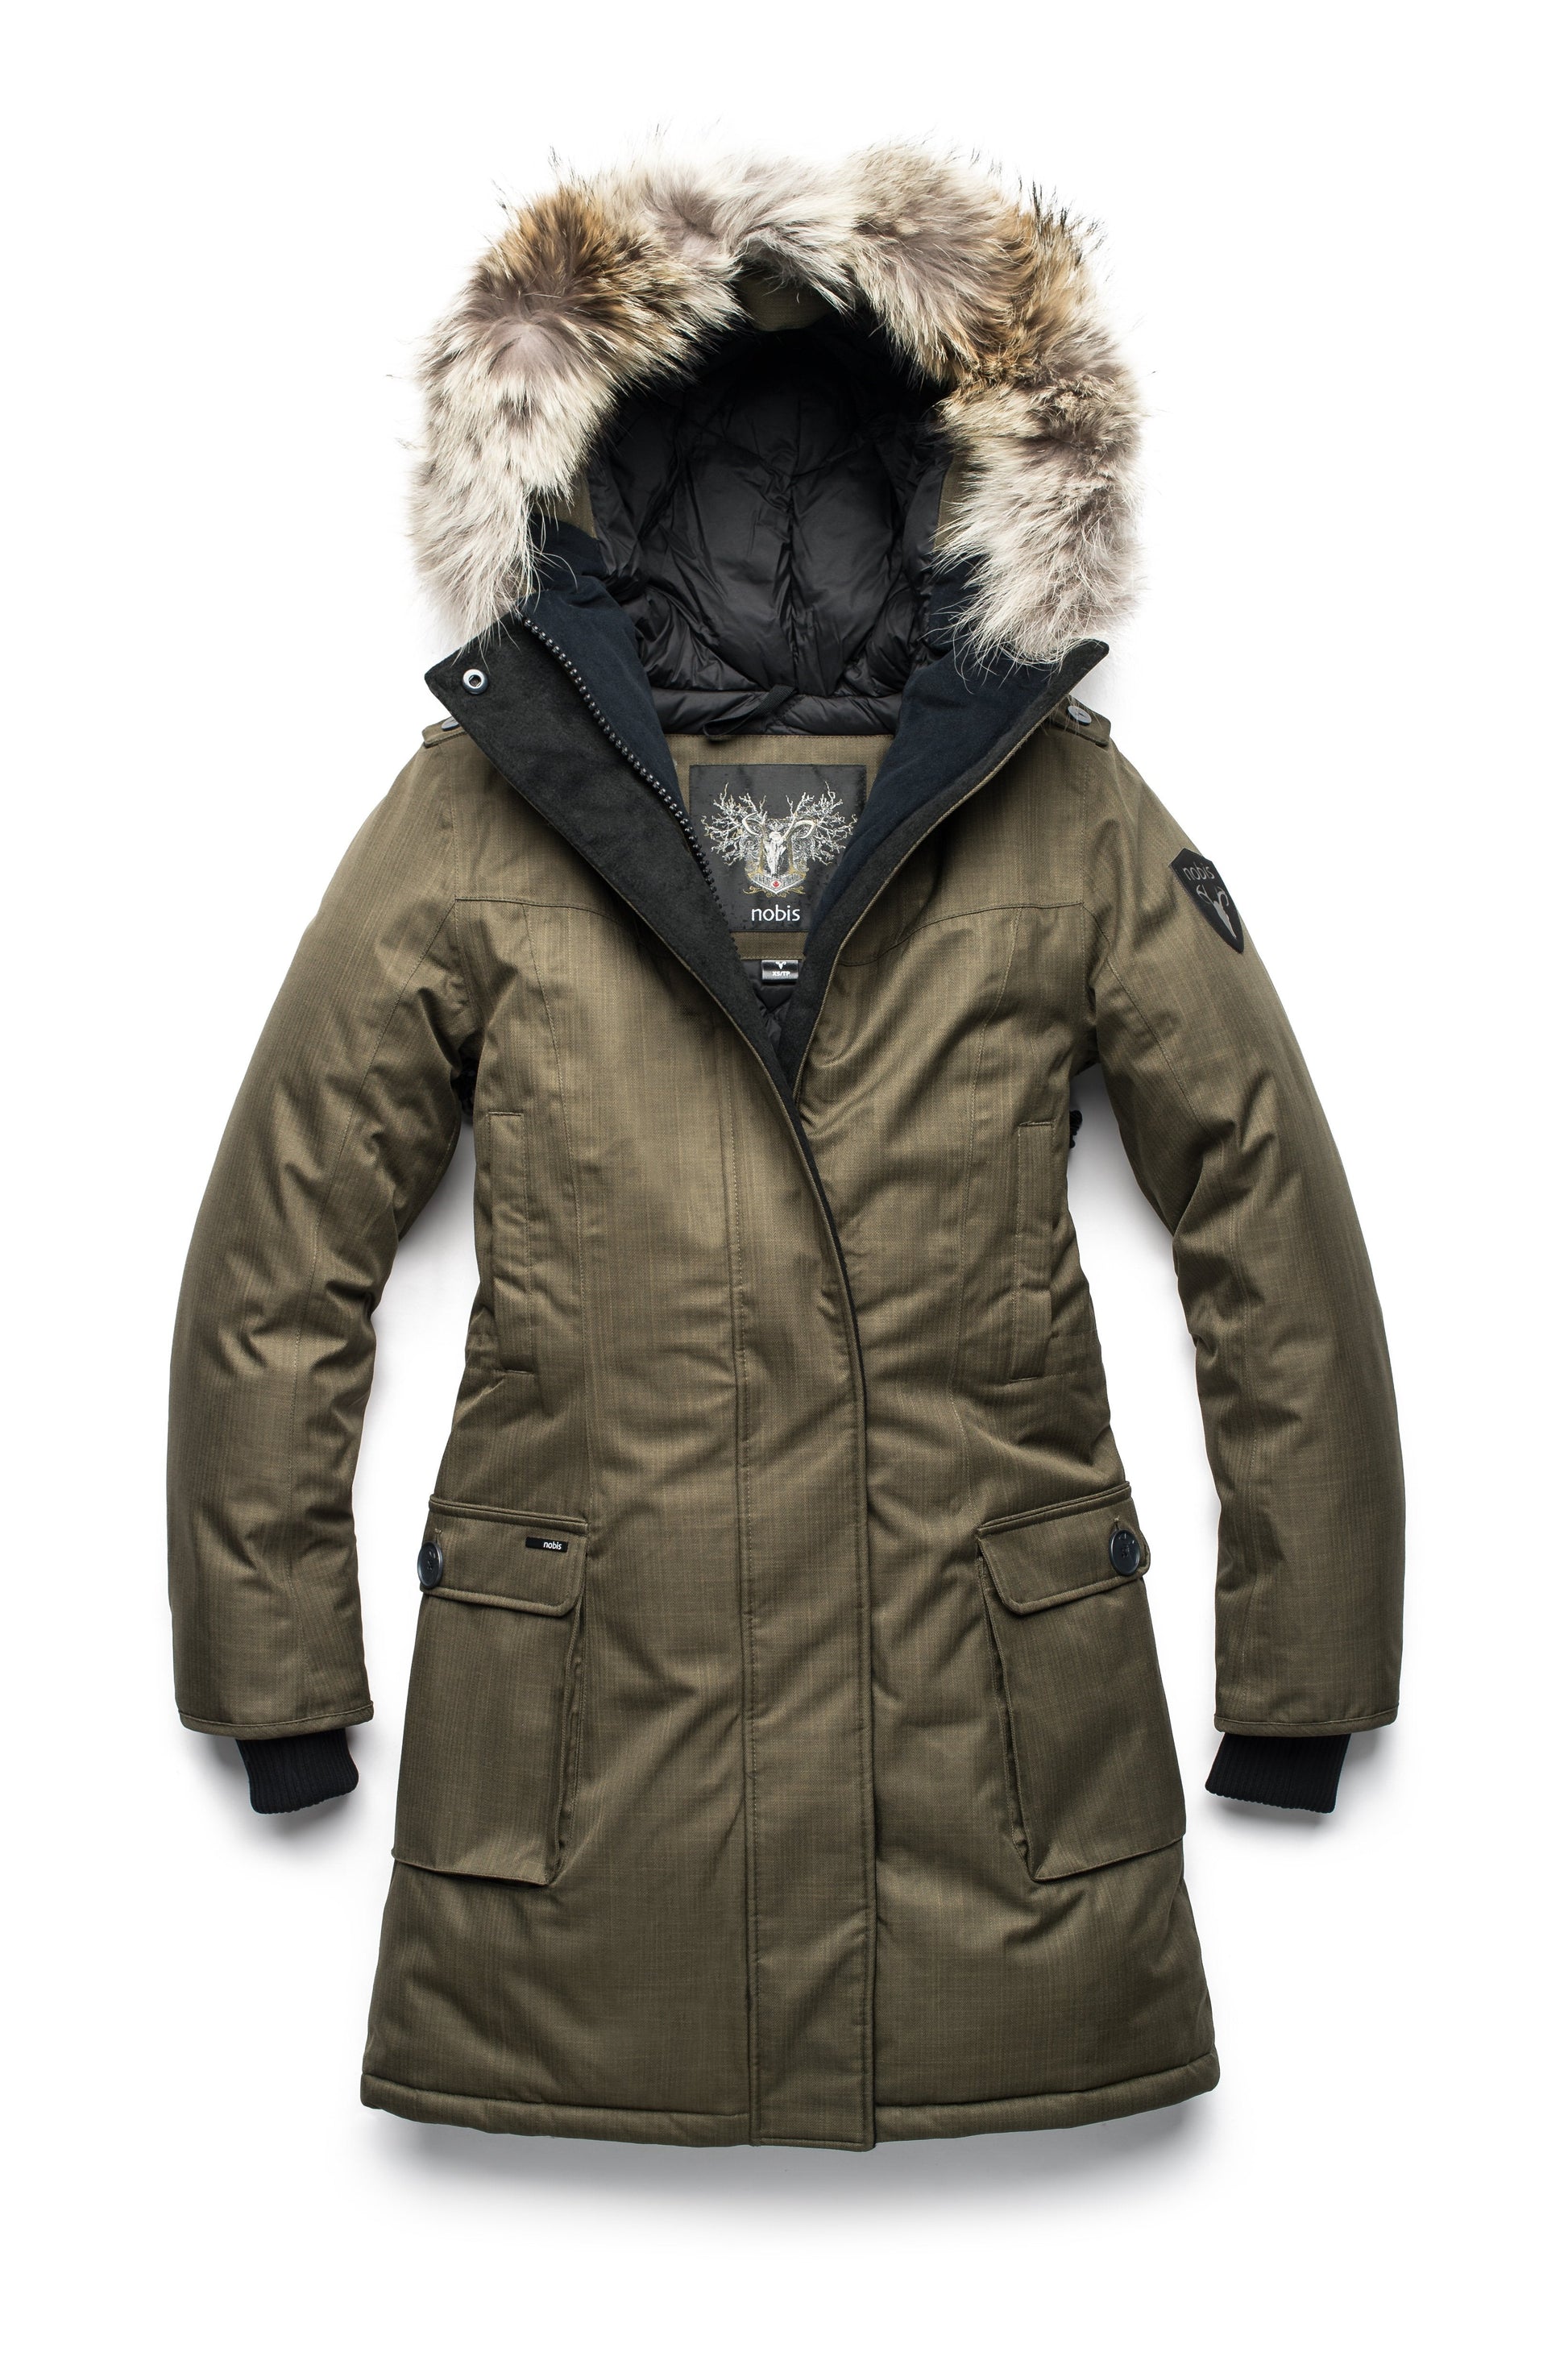 Women's knee length down filled parka with fur trim hood in CH Army Green